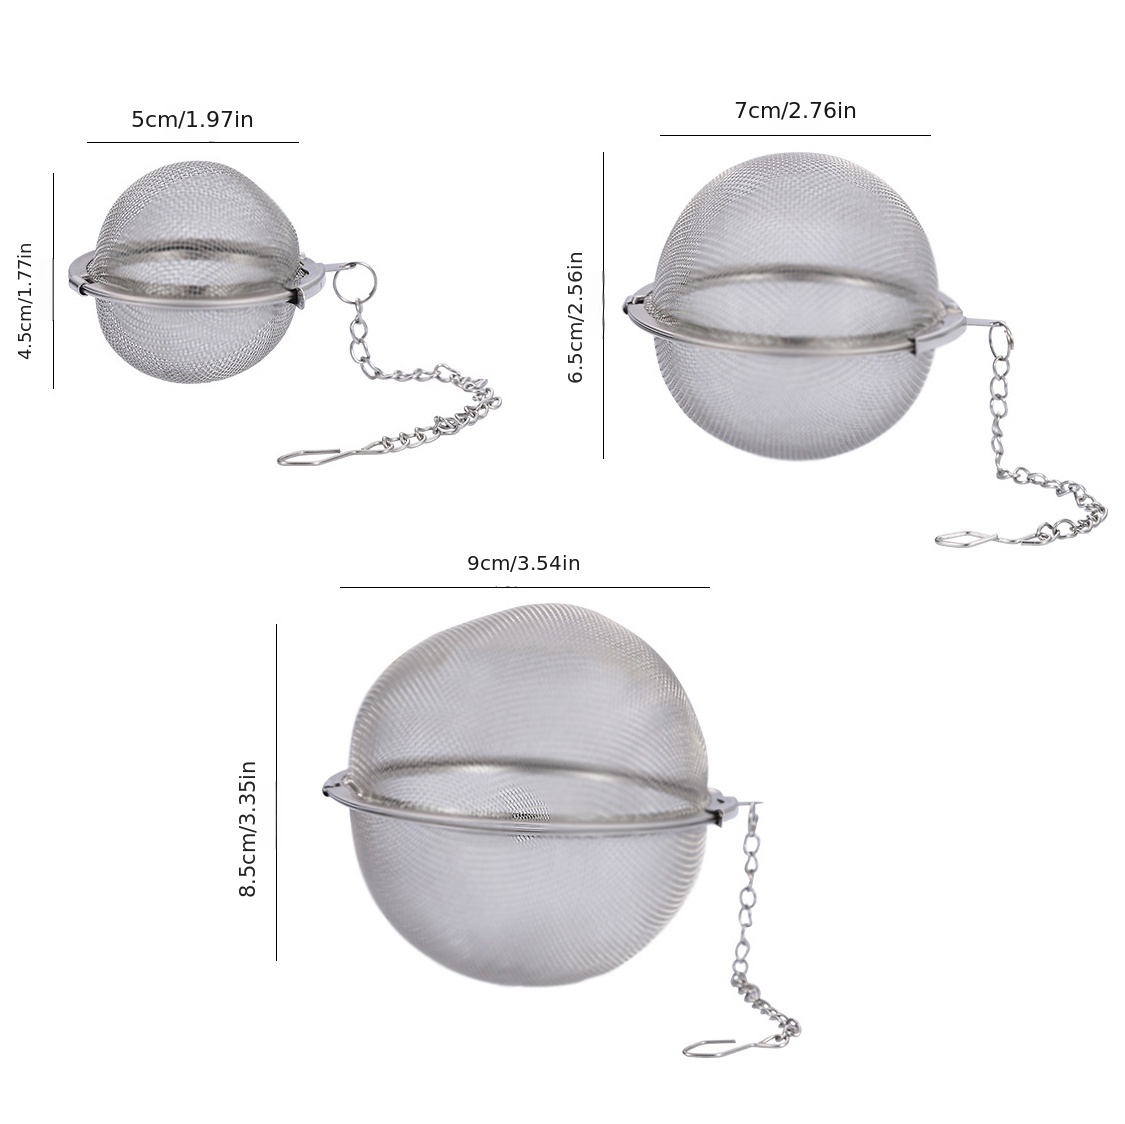 1 pack premium 304 stainless steel tea ball perfect for brewing delicious tea at home details 0